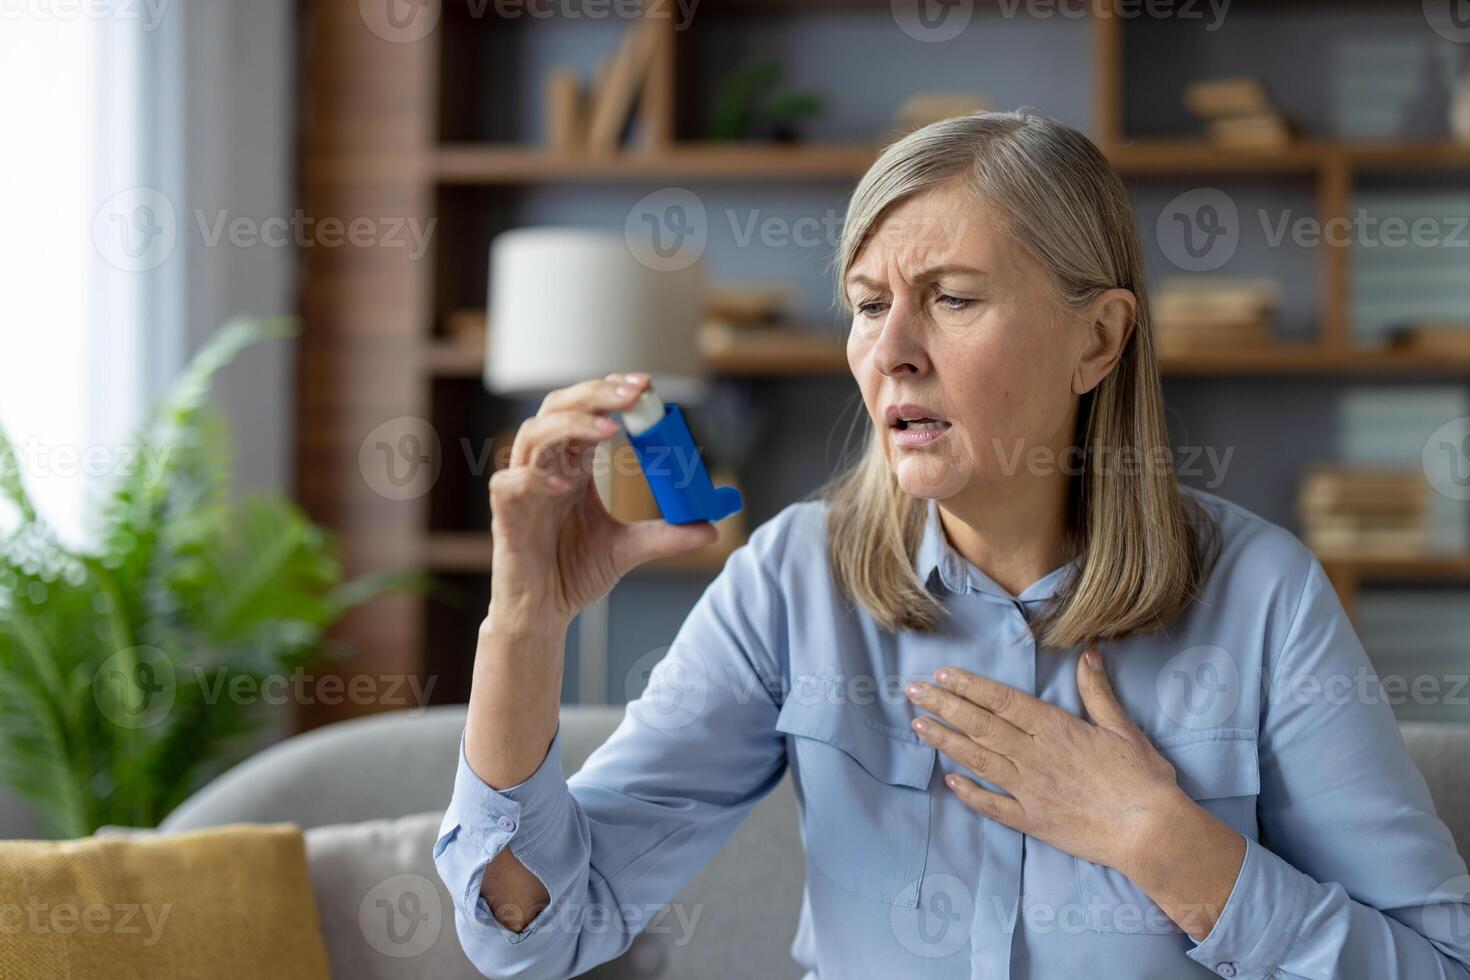 An elderly woman experiences an asthma attack and uses a blue inhaler. She looks concerned while sitting in a modern living room. photo